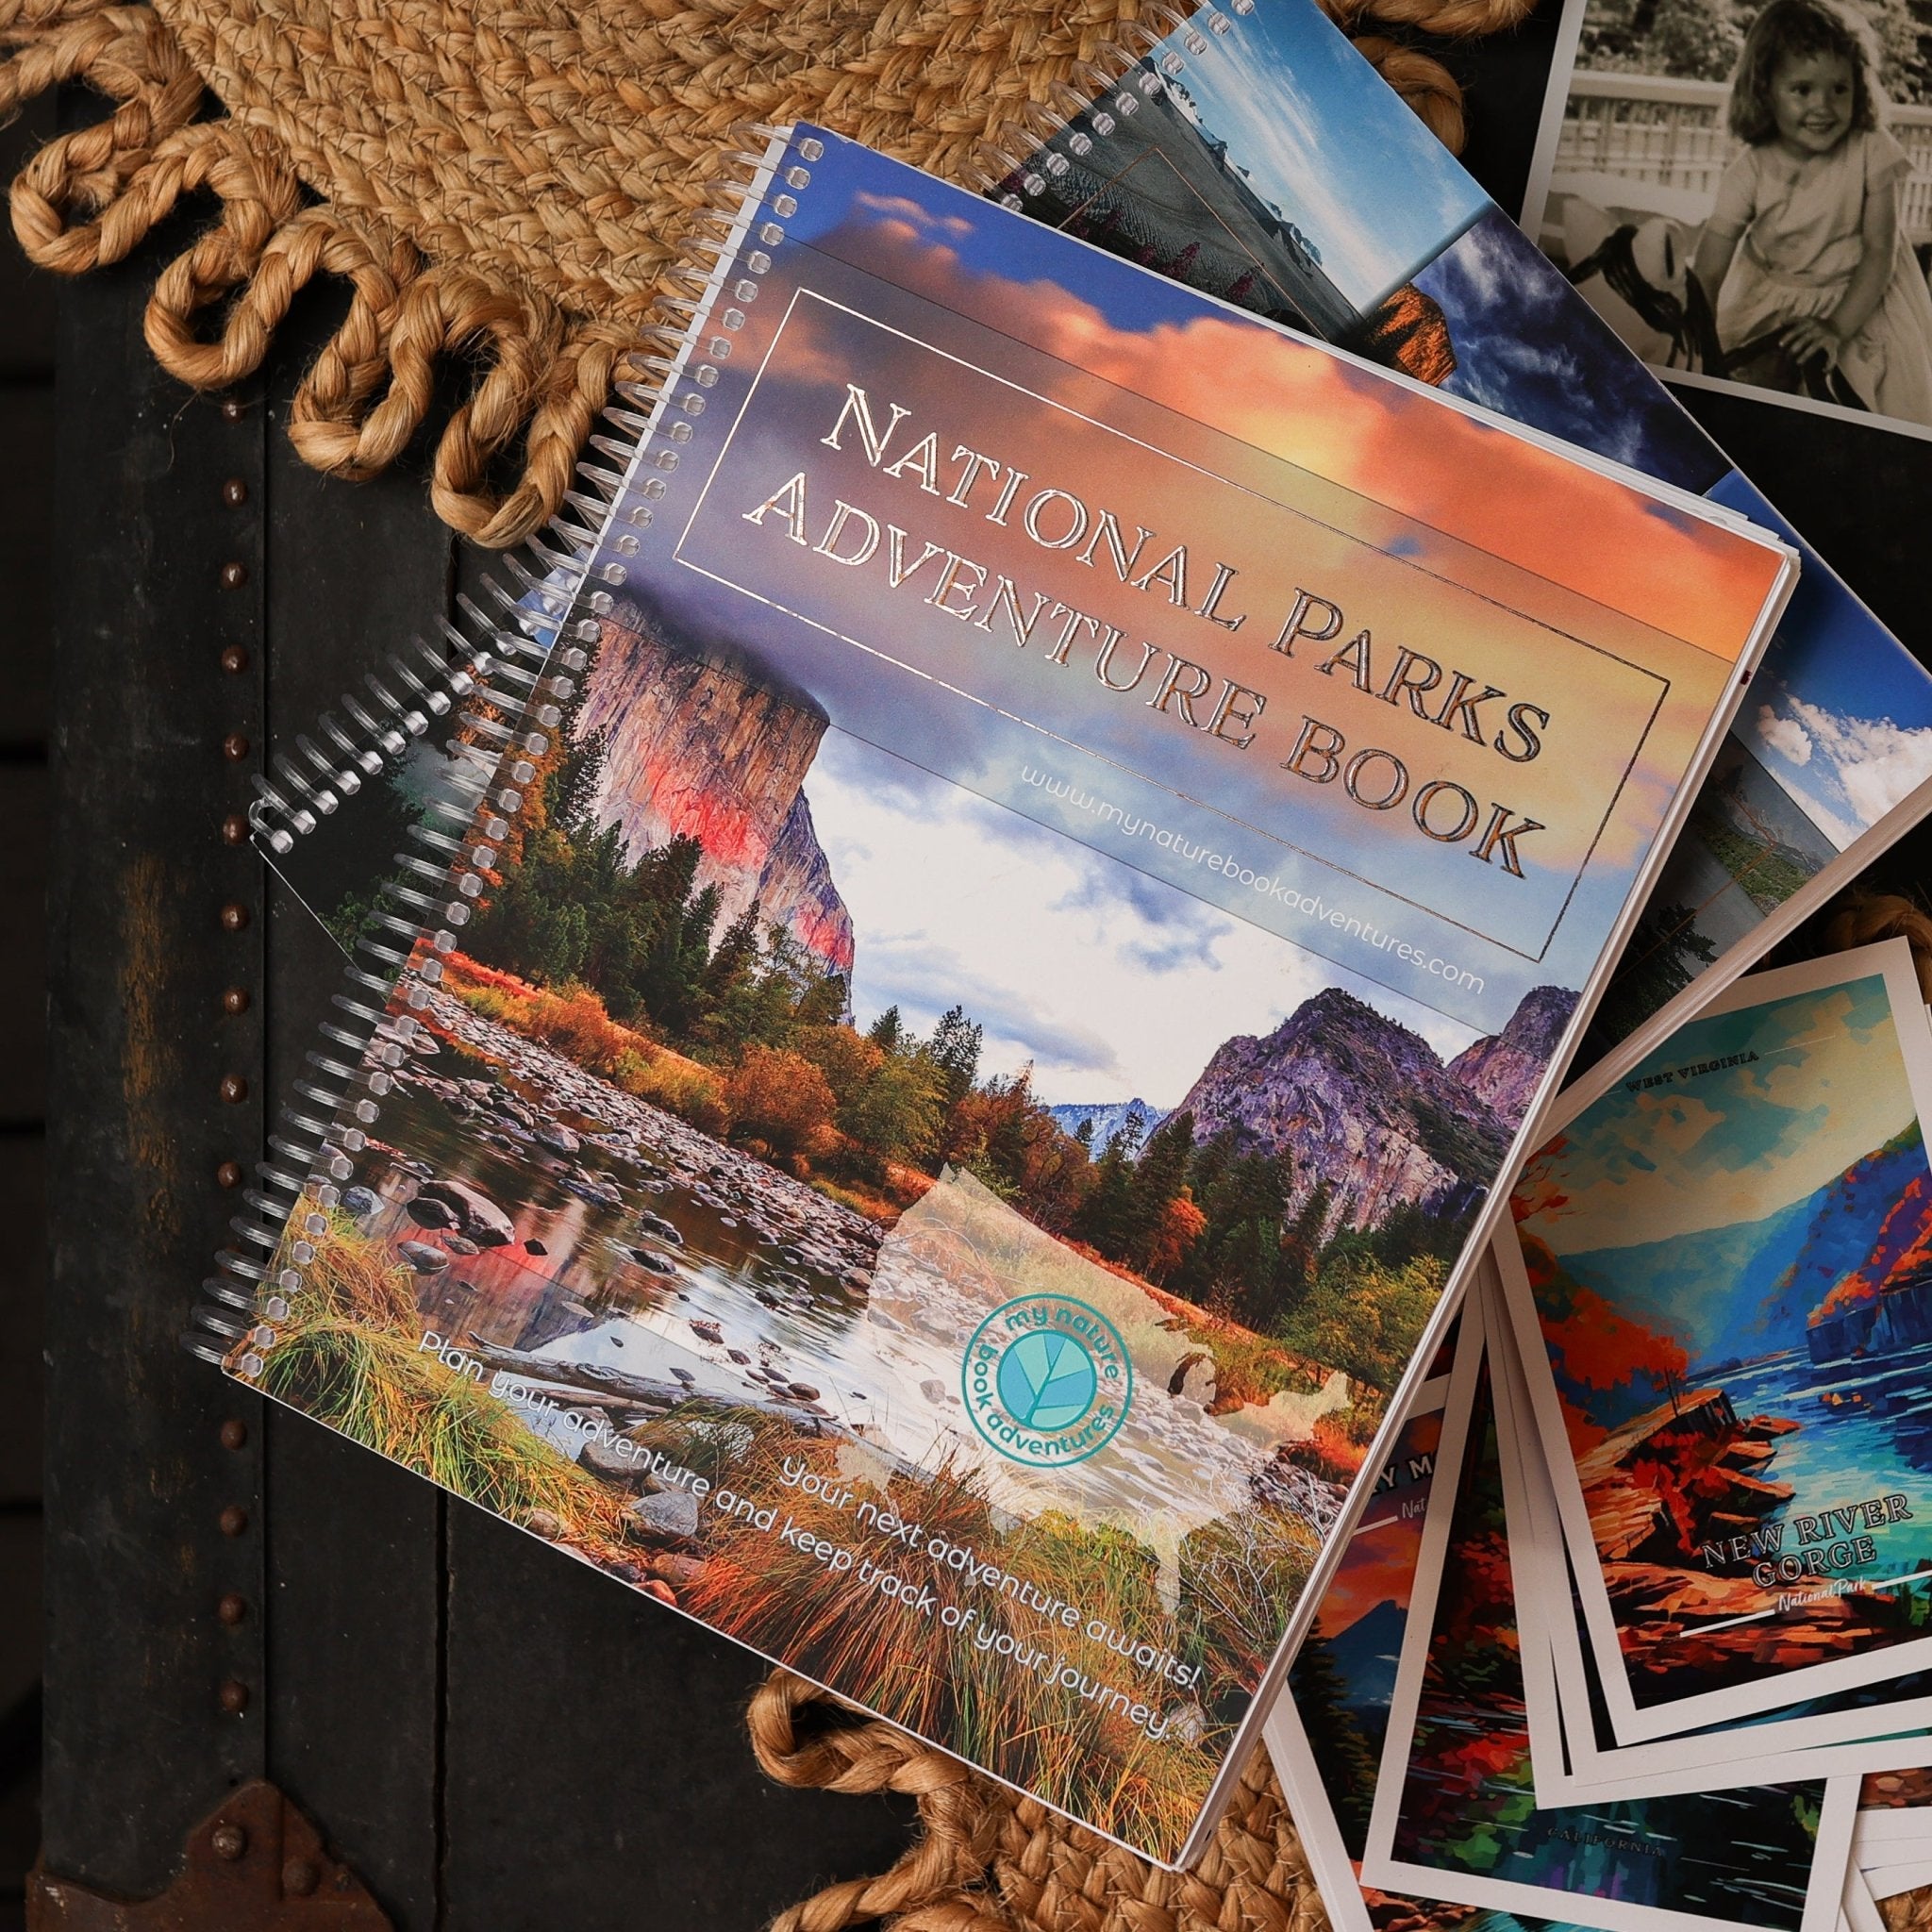 National Parks - Adventure Planning Journal - My Nature Book Adventures